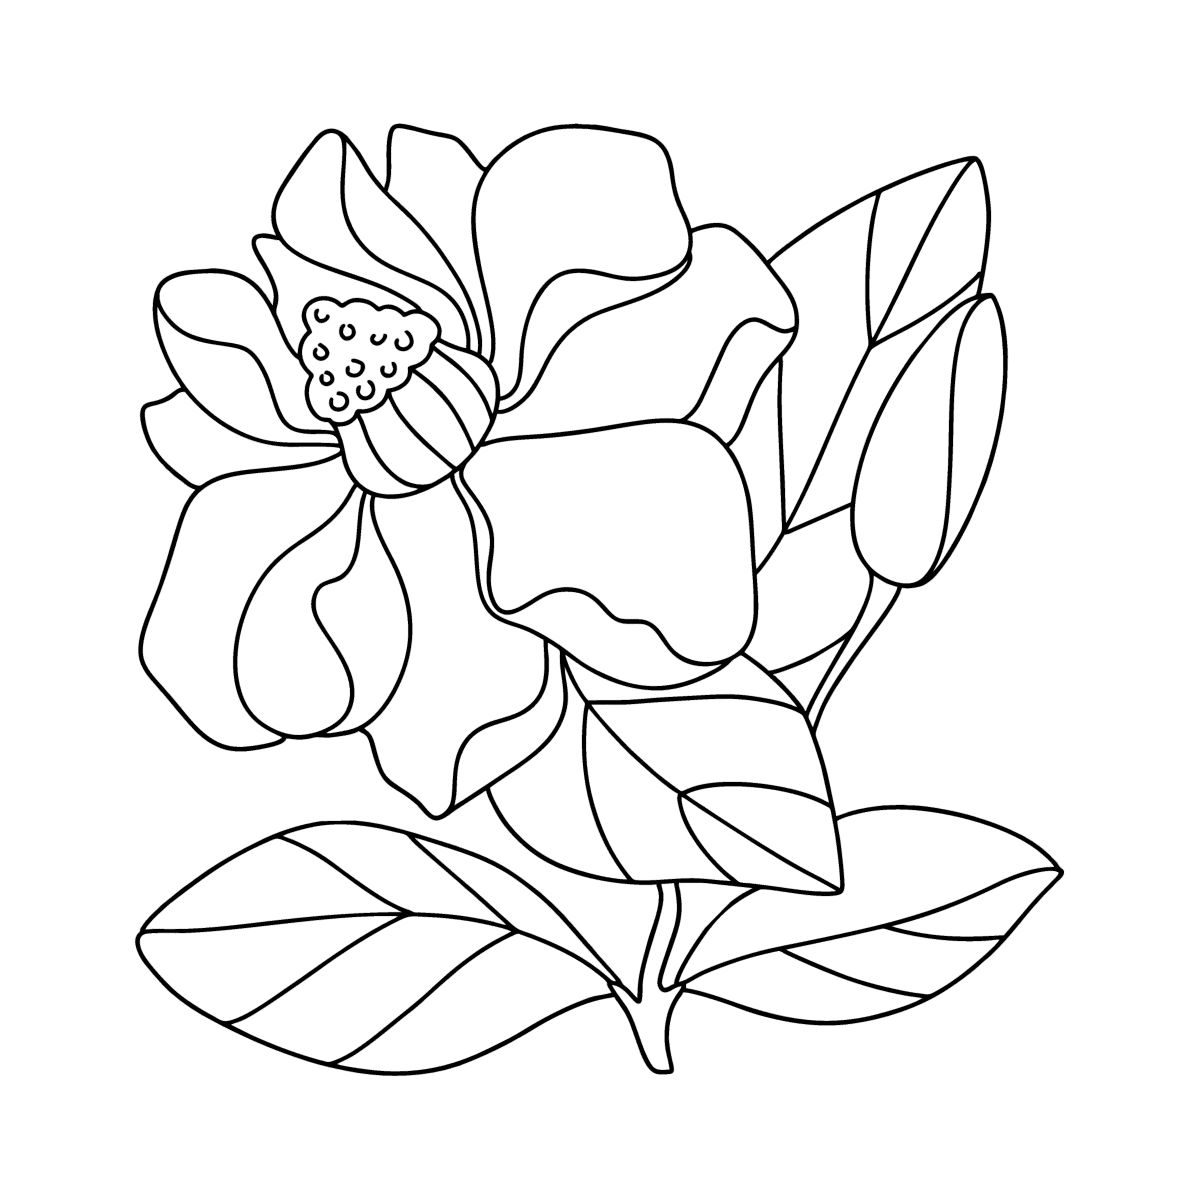 Delicate Magnolia - Flowers Coloring Pages for Adults Online